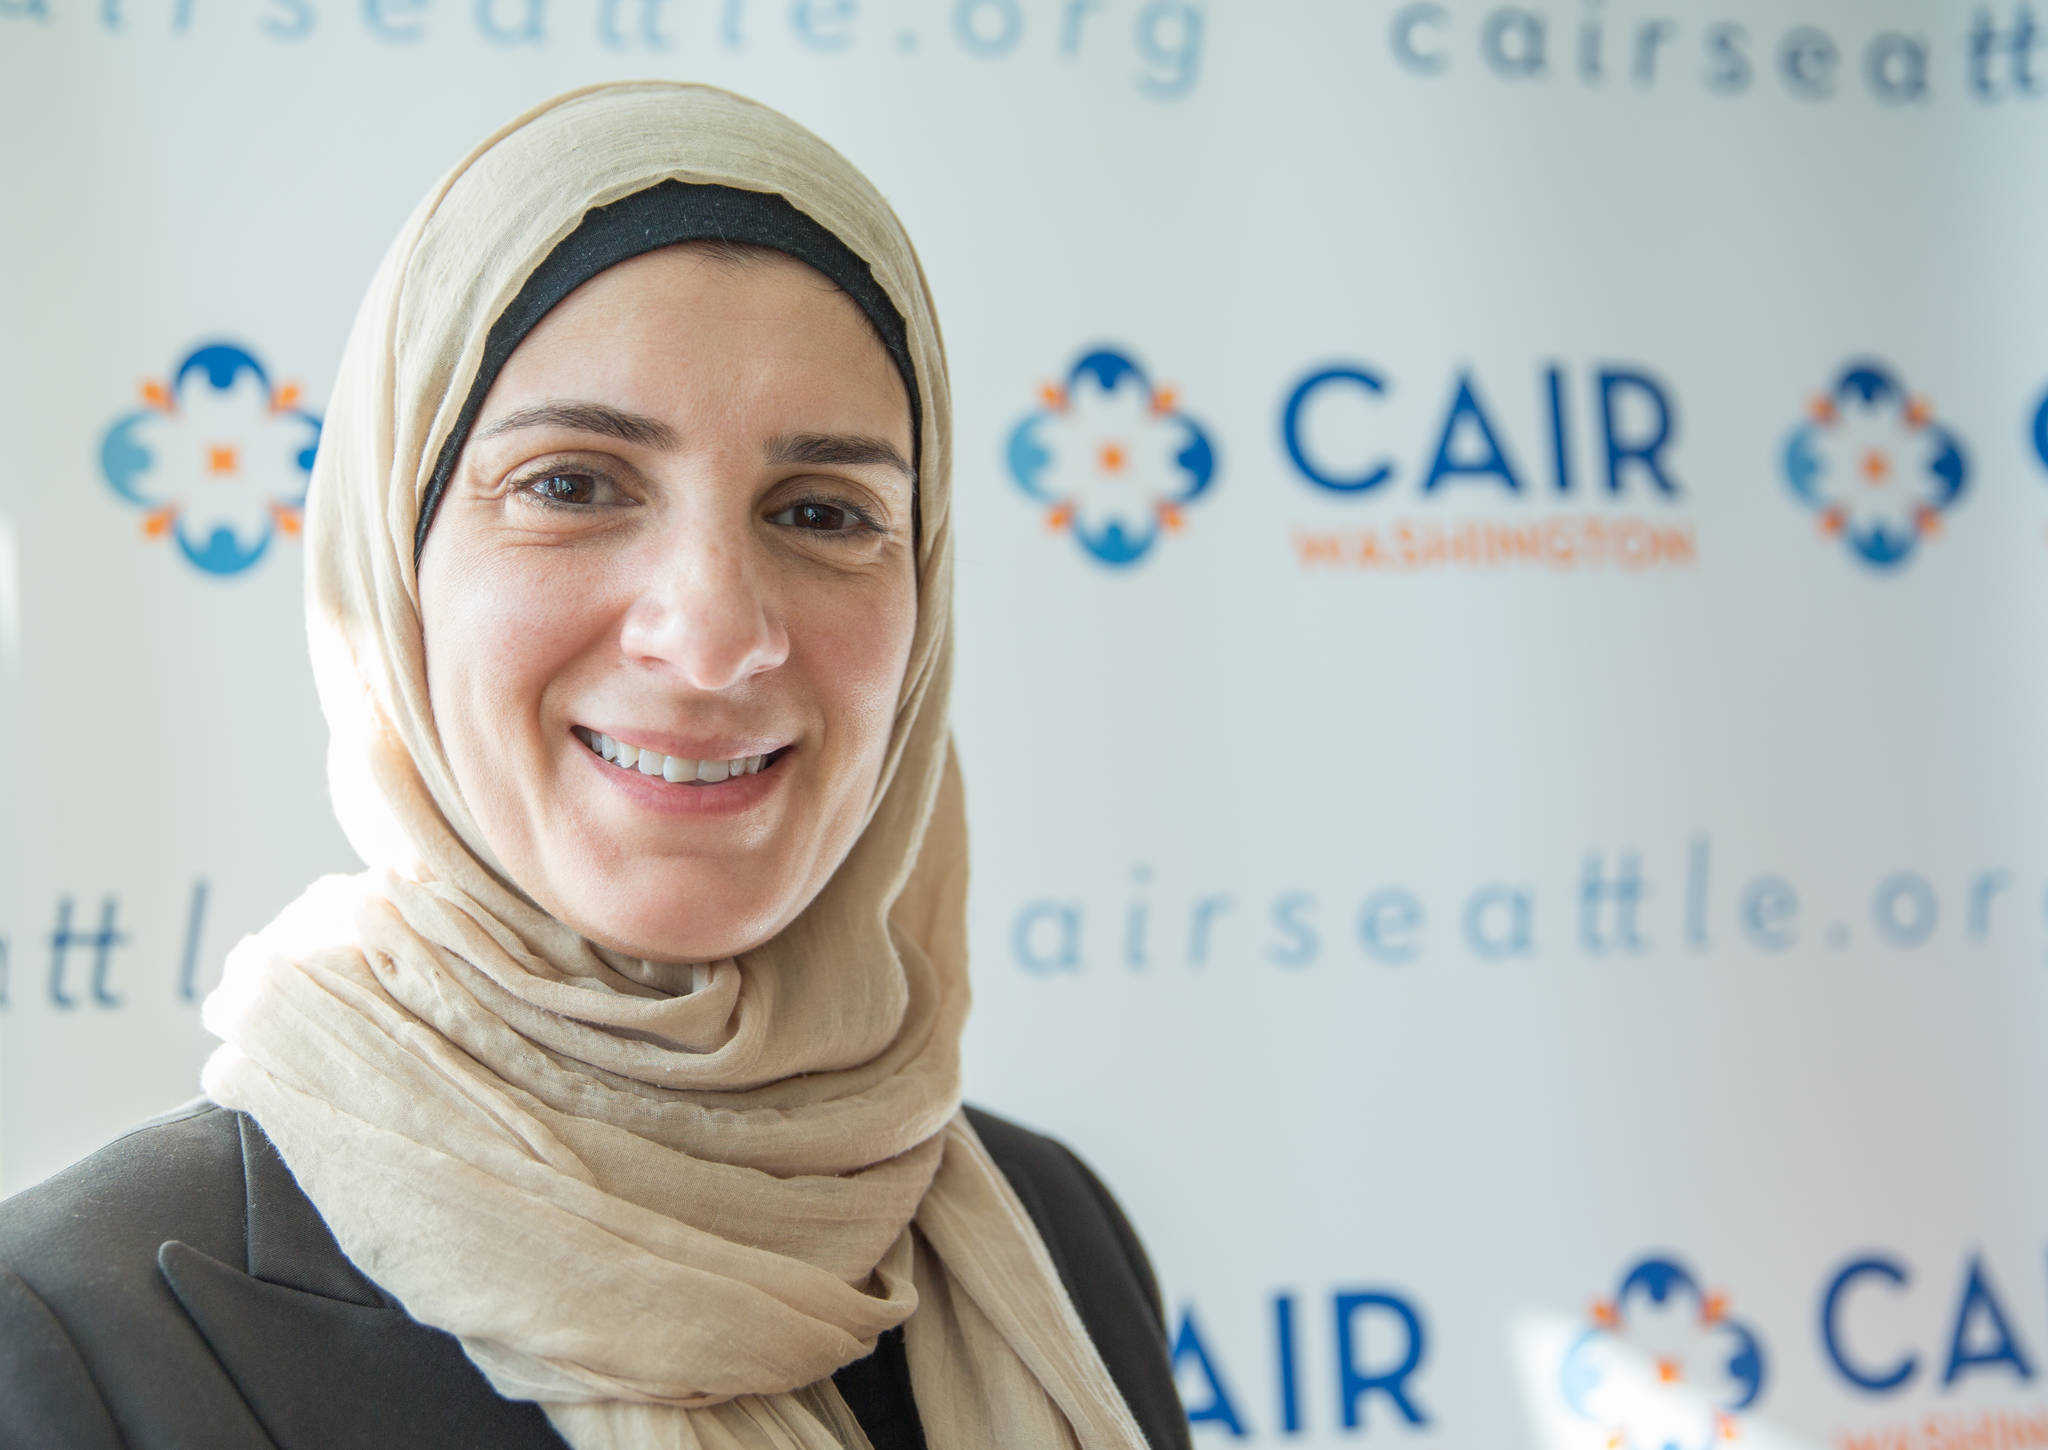 Jasmin Samy, Civil Rights Manager with CAIR-WA. Photo by Alex Garland